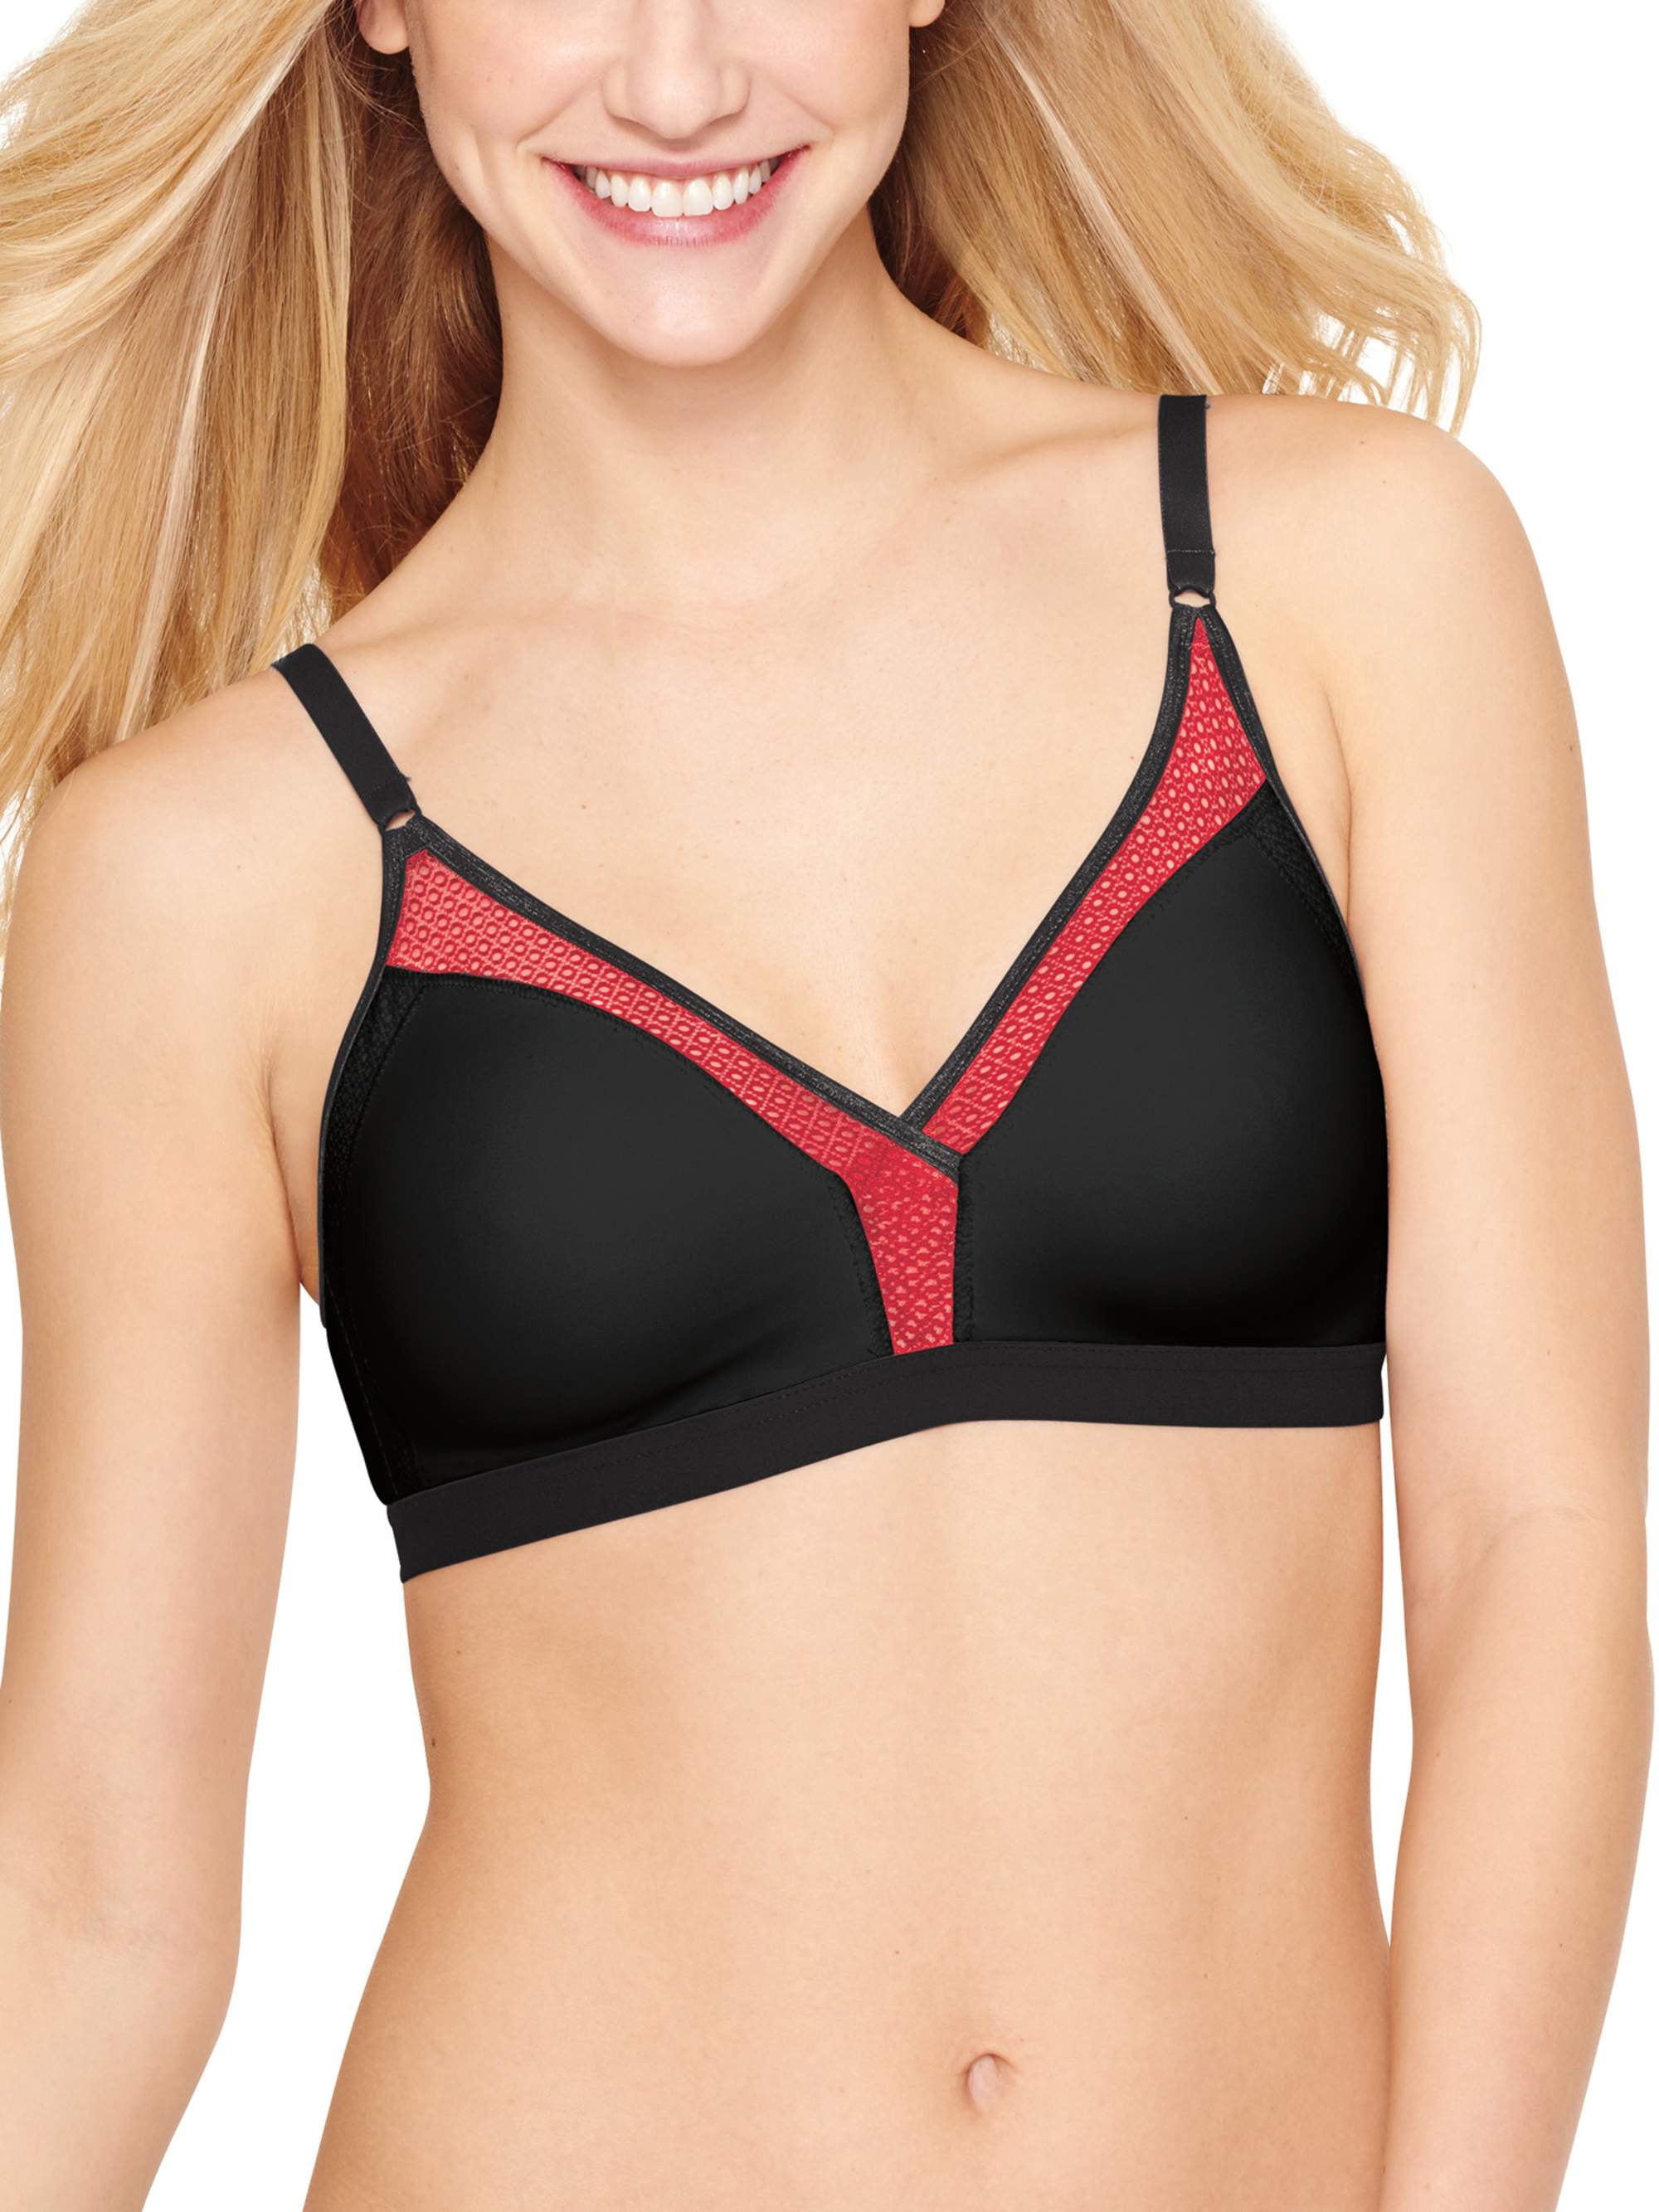 Hanes Women's X-Temp Unlined Wirefree Convertible, Black/Diva Pink